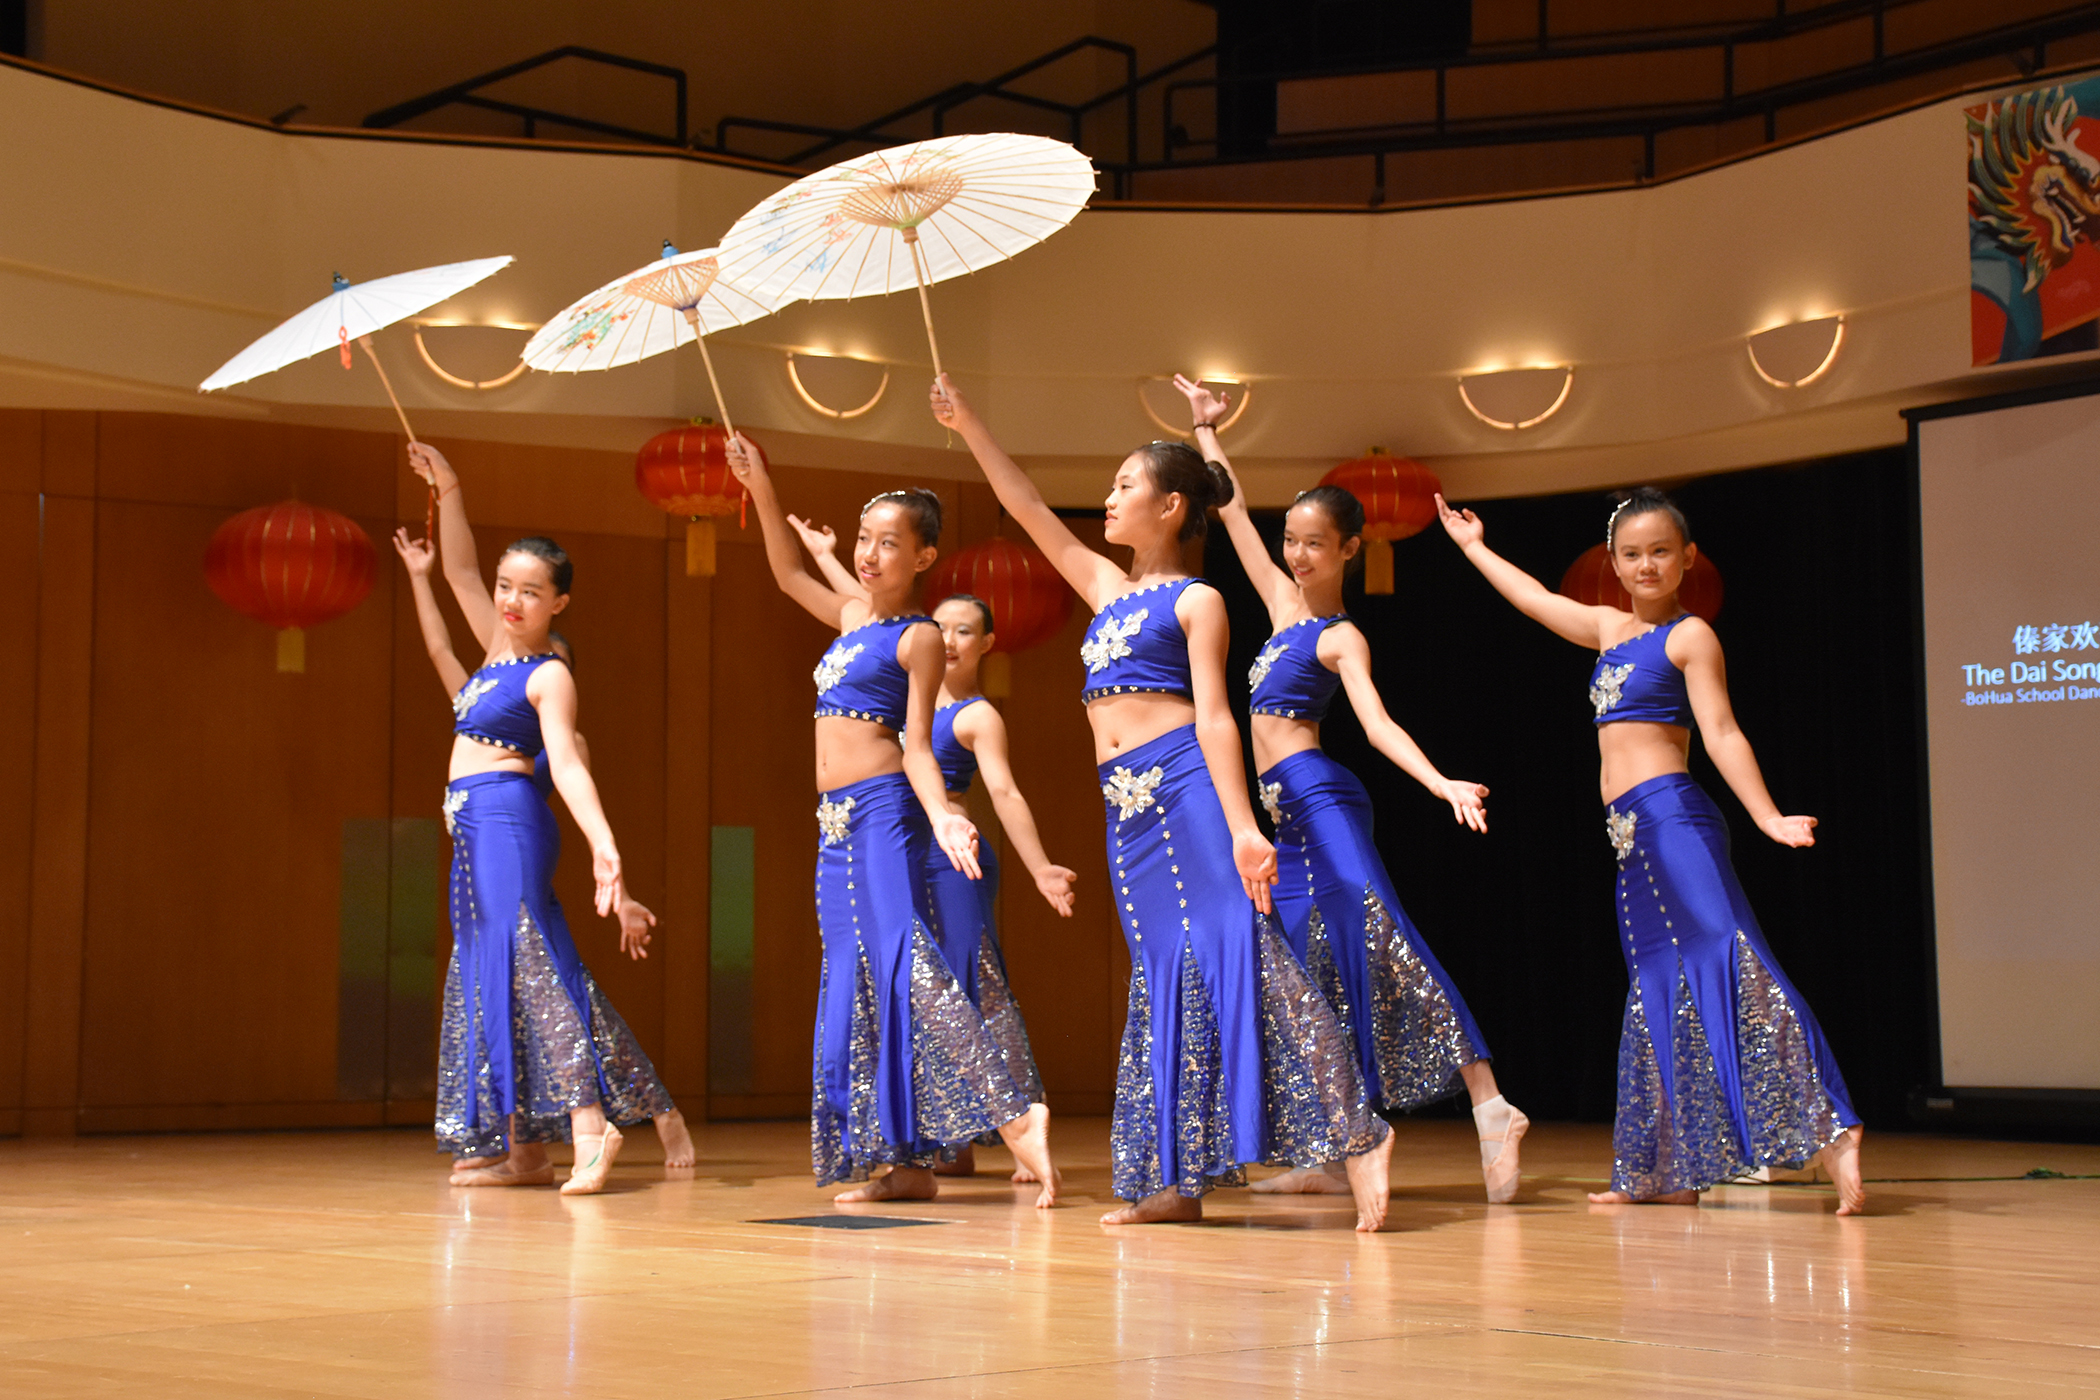 women performing from a Chinese dance academy